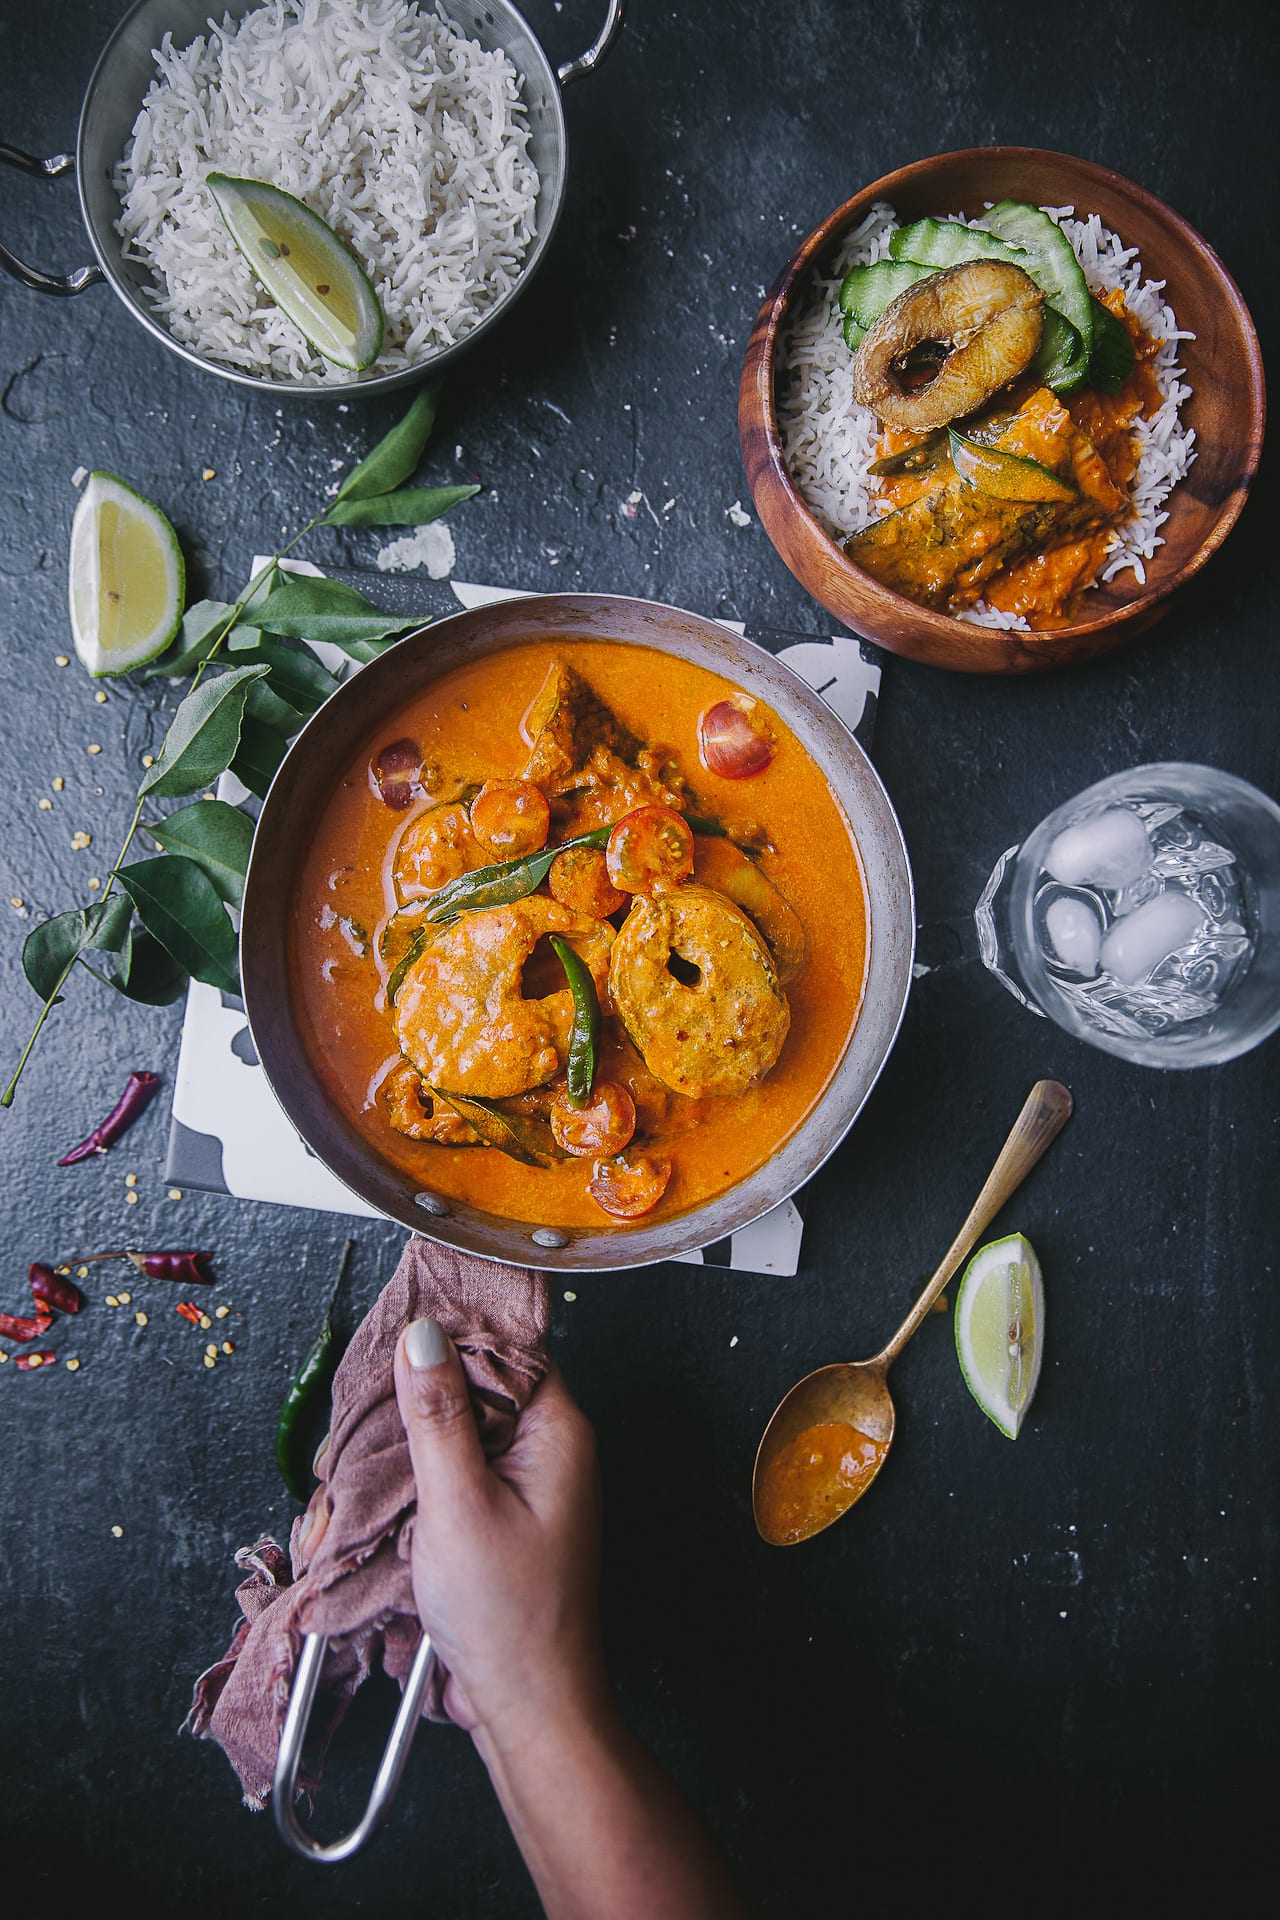 Kerala Style fish curry with tamarind, coconut milk and spices! Easy and Quick #playfulcooking #fishcurry #indianfood #seafoodcurry #foodphotography #foodstyling #kerelafishcurry